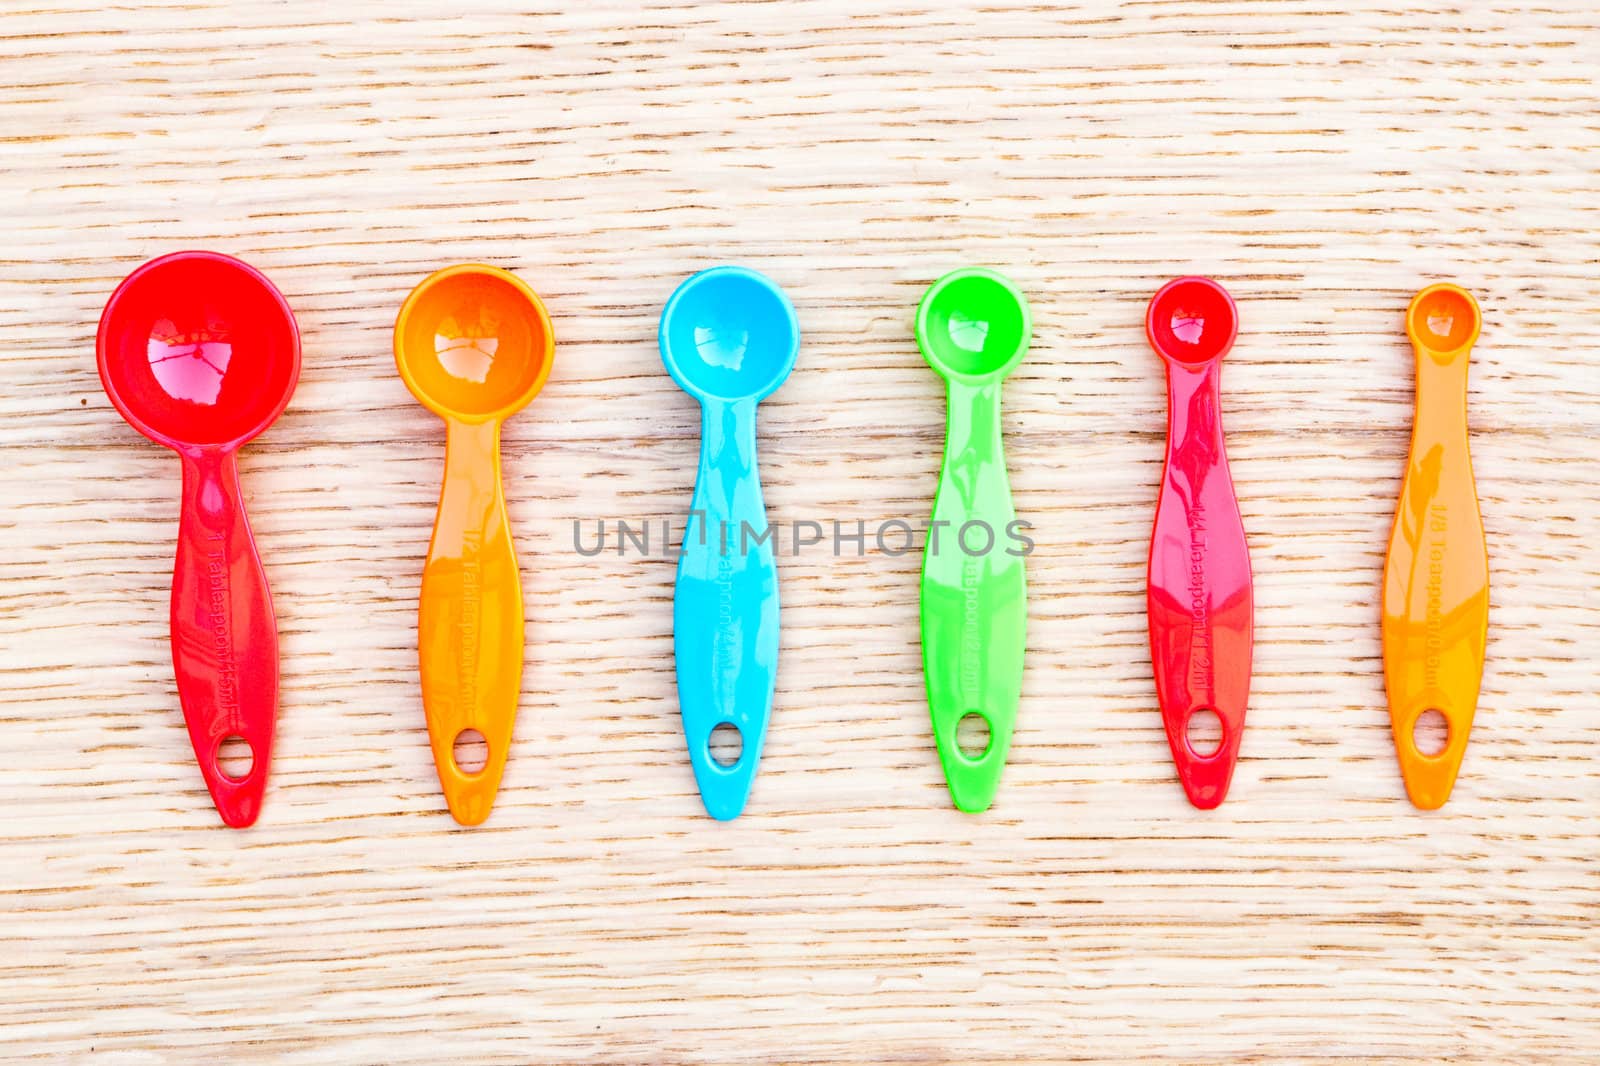 Group of six colorful measuring spoons on a wooden surface